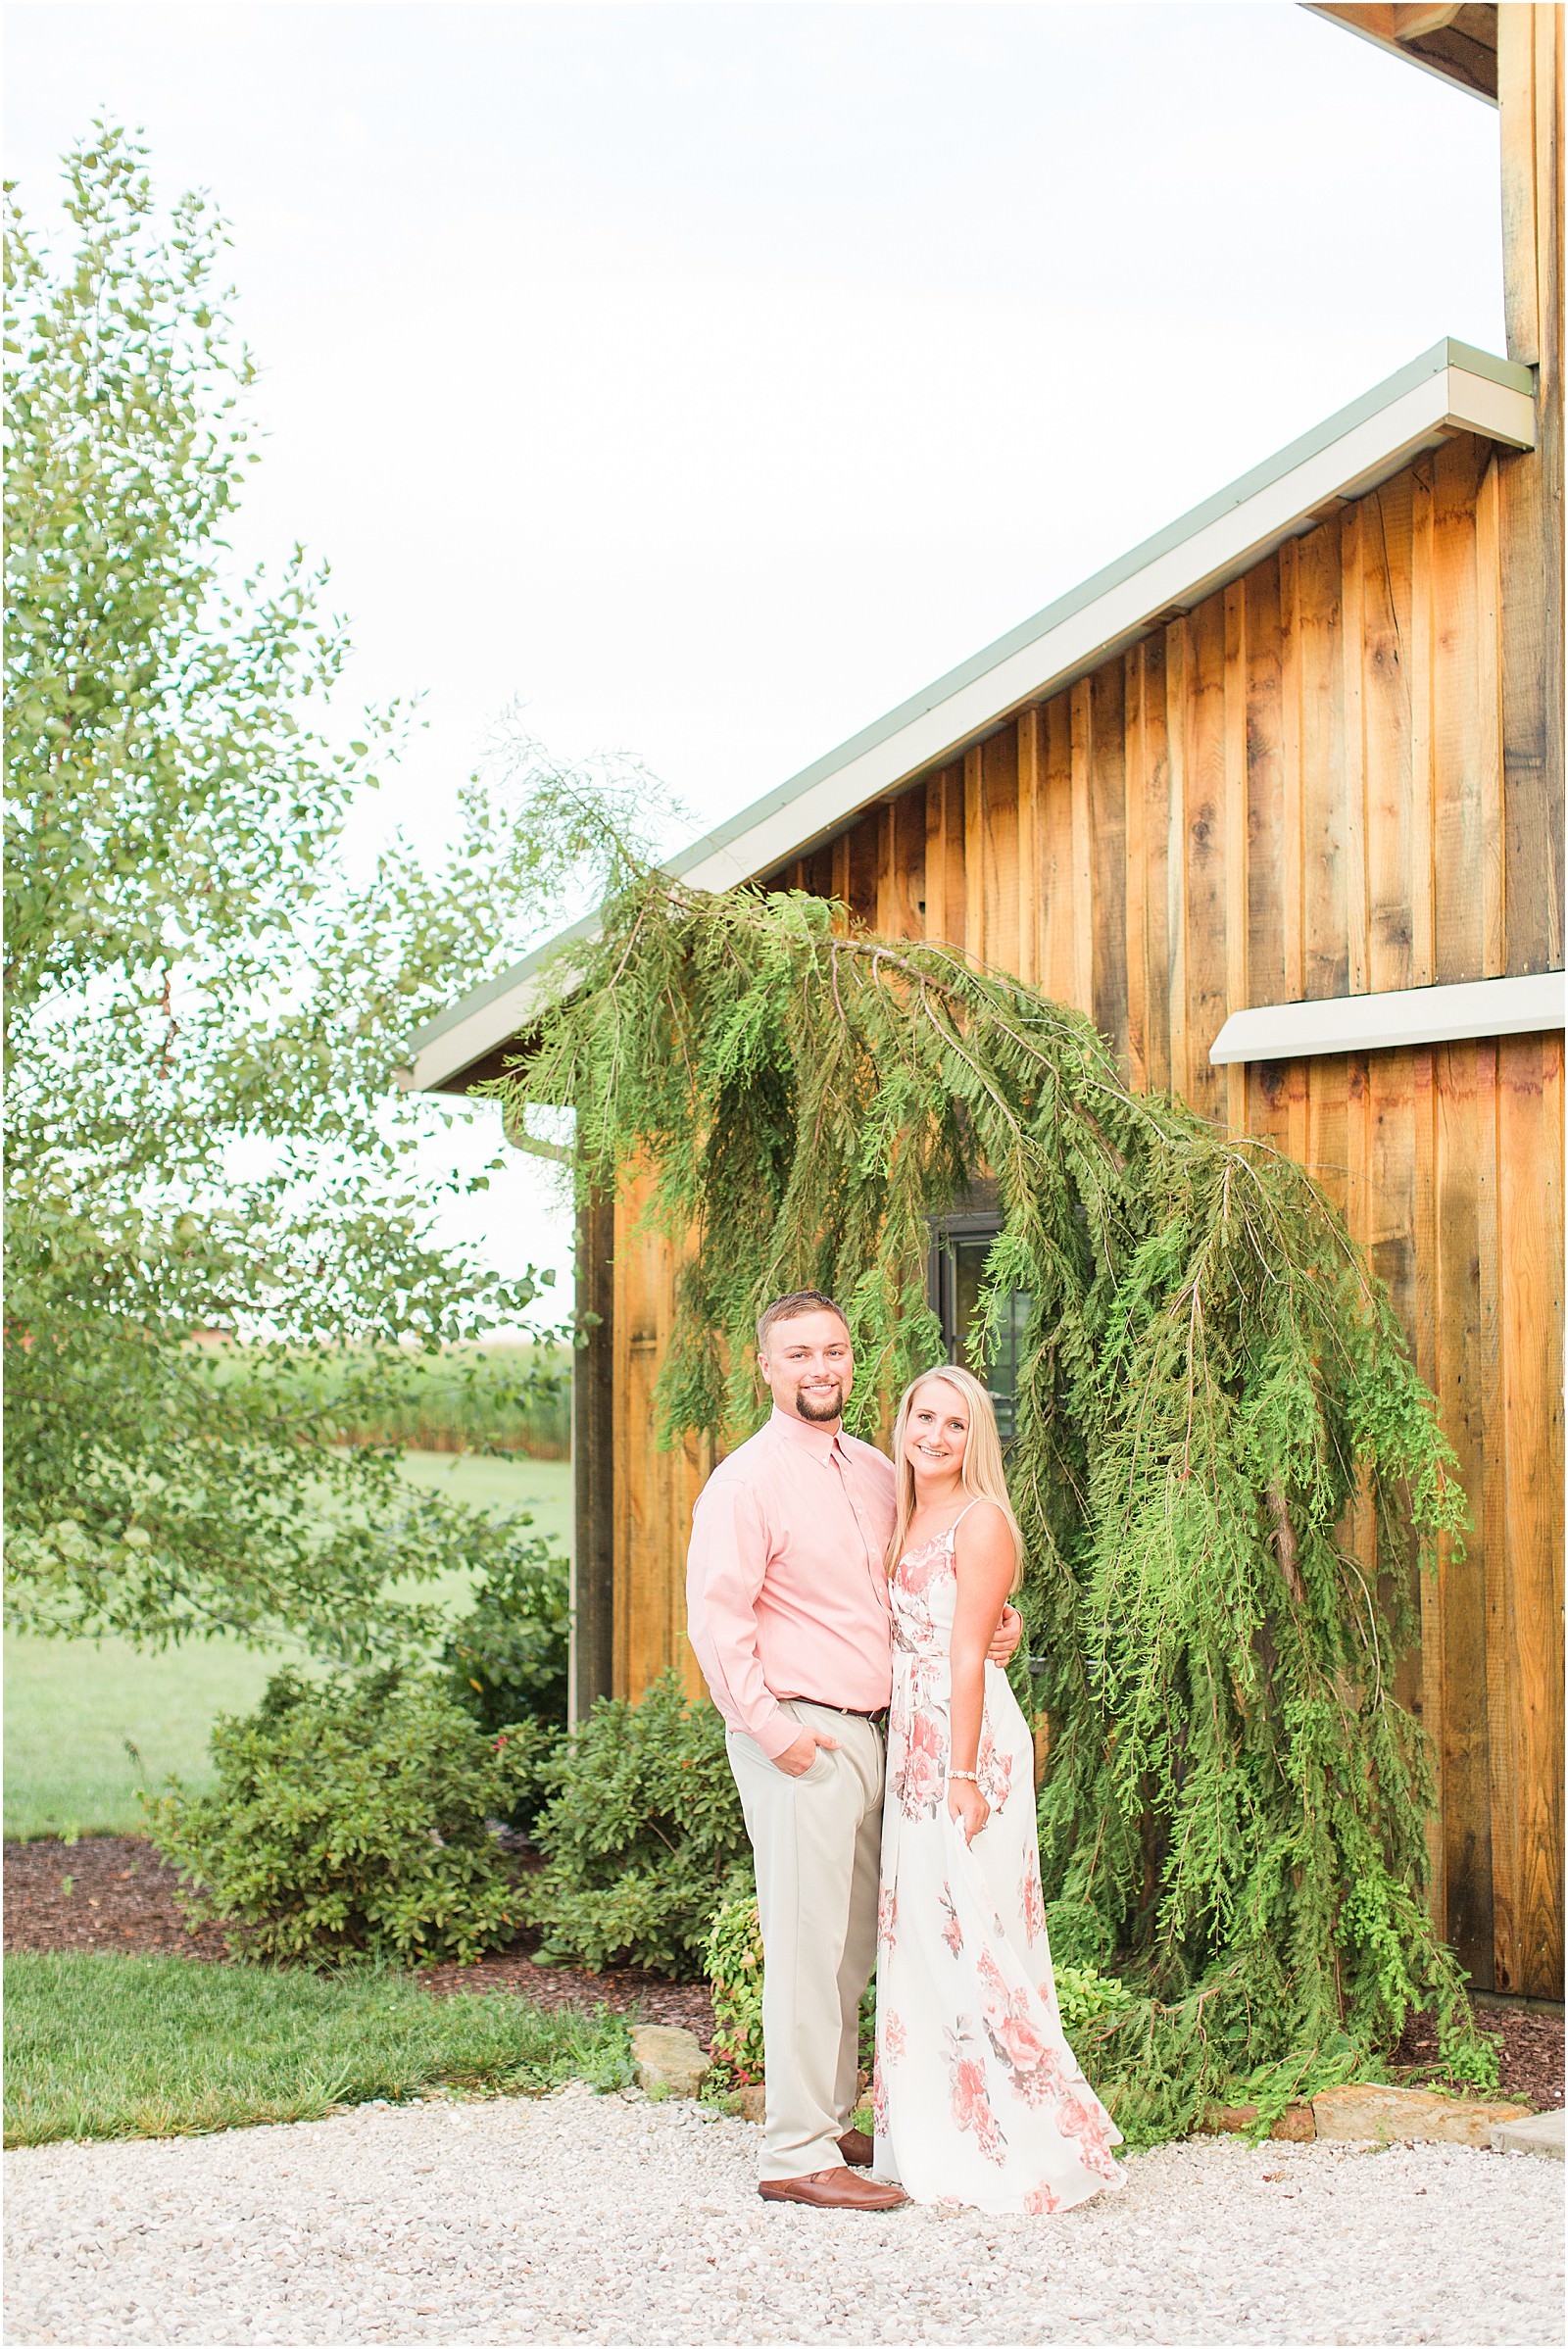 Lauren and Bryce | The Corner House B&ed and Breakfast Engagement Session | Bret and Brandie Photography 016.jpg